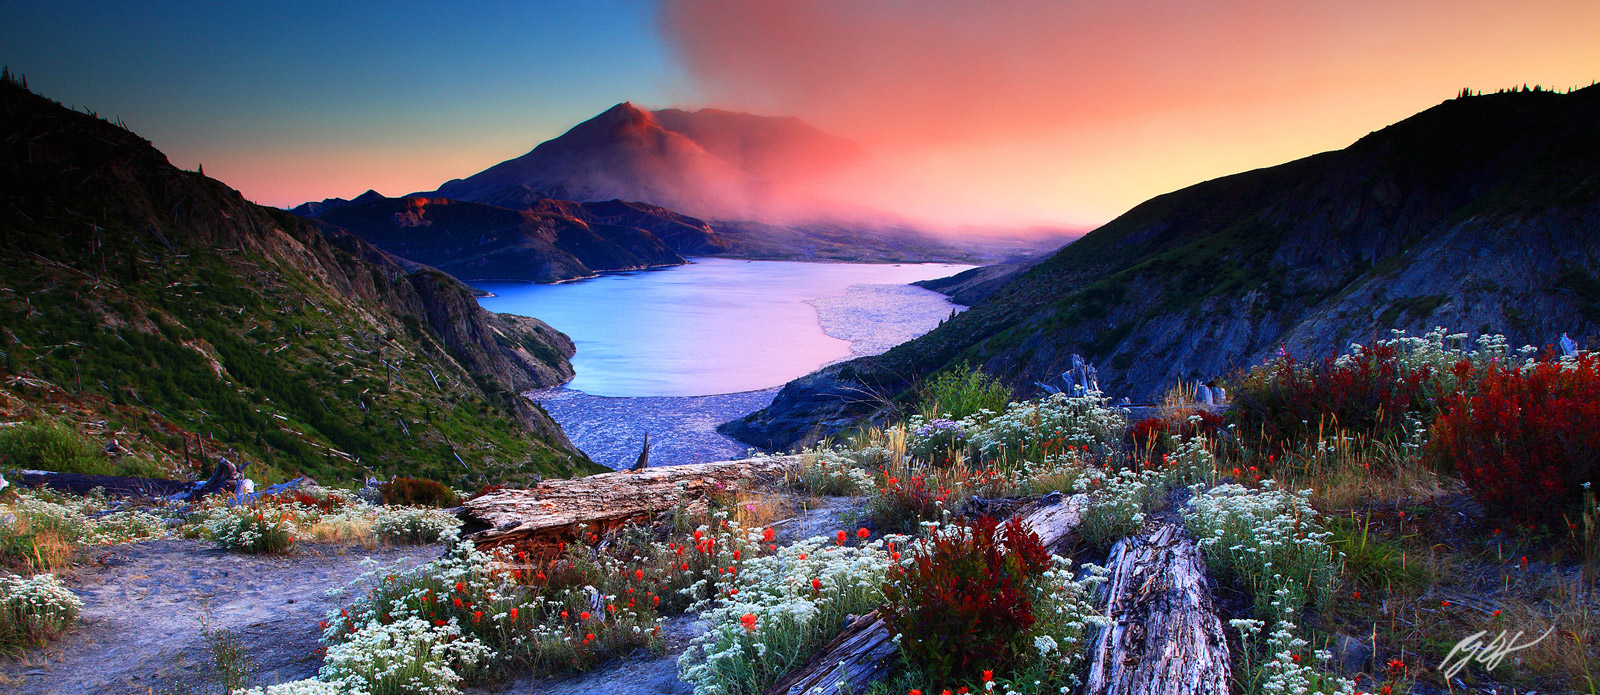 Sunset Wildflowers and Mt St Helens from Norway Pass in Mt St Helens National Volcanic Monument in Washington